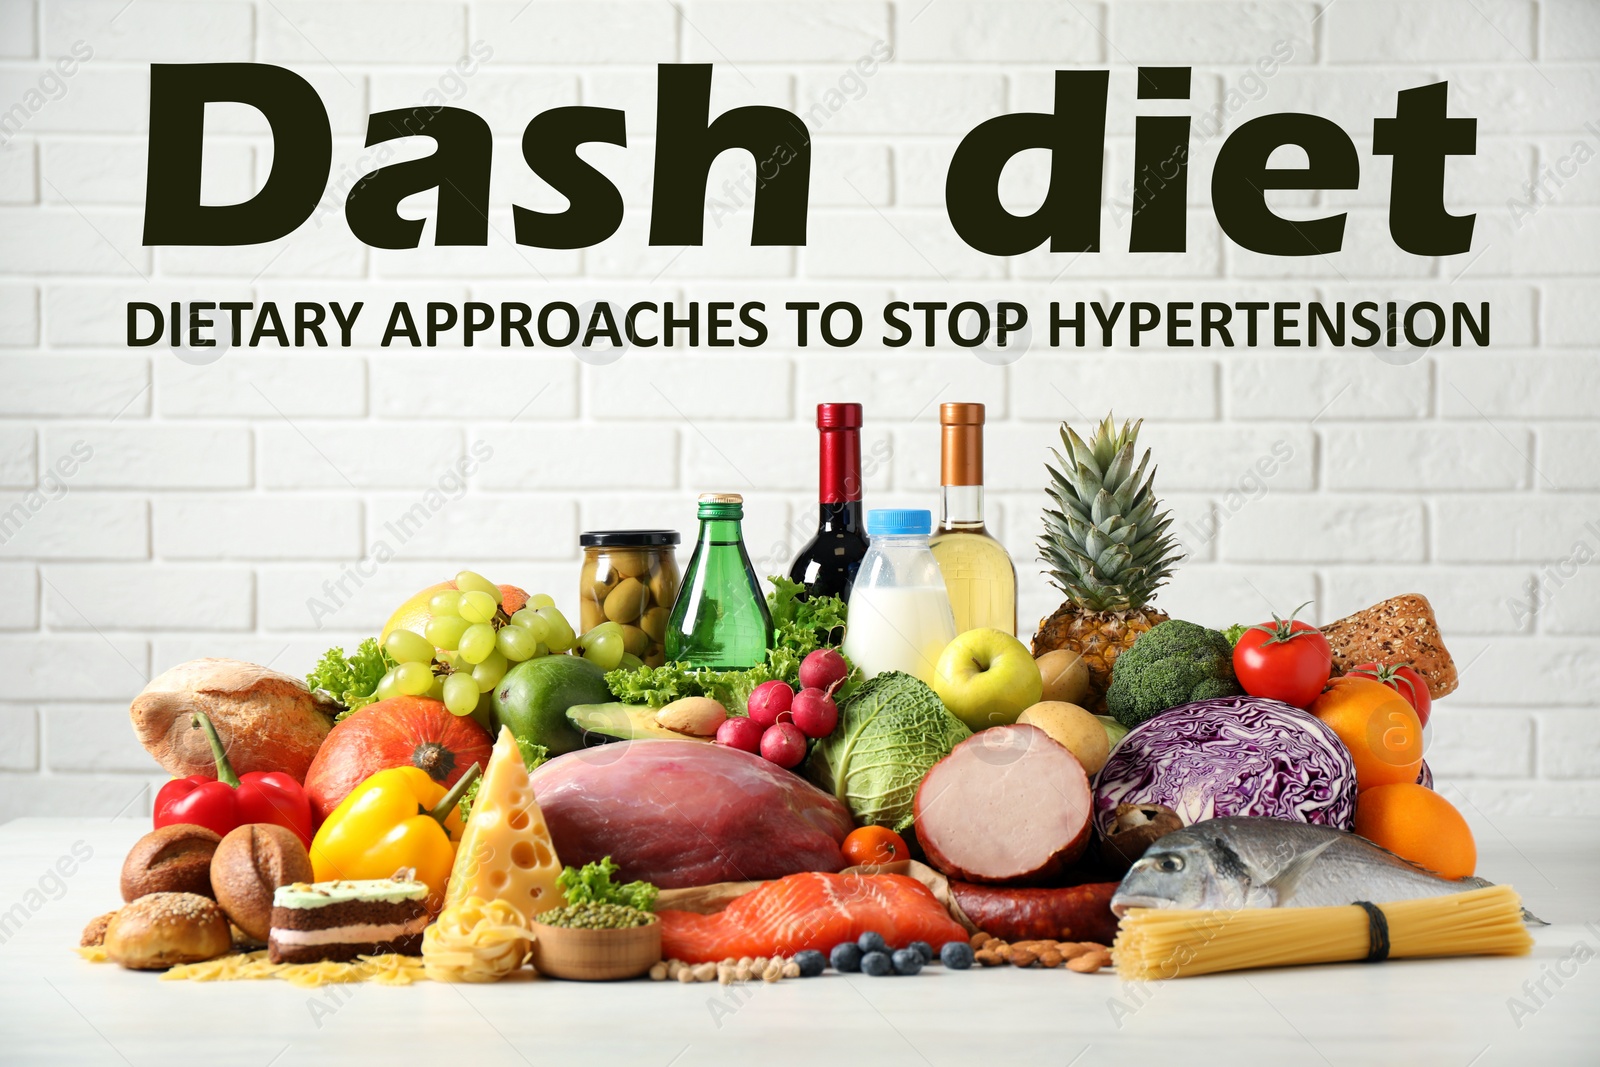 Image of Dash diet (Dietary approaches to stop hypertension). Many different healthy food and drinks on white table